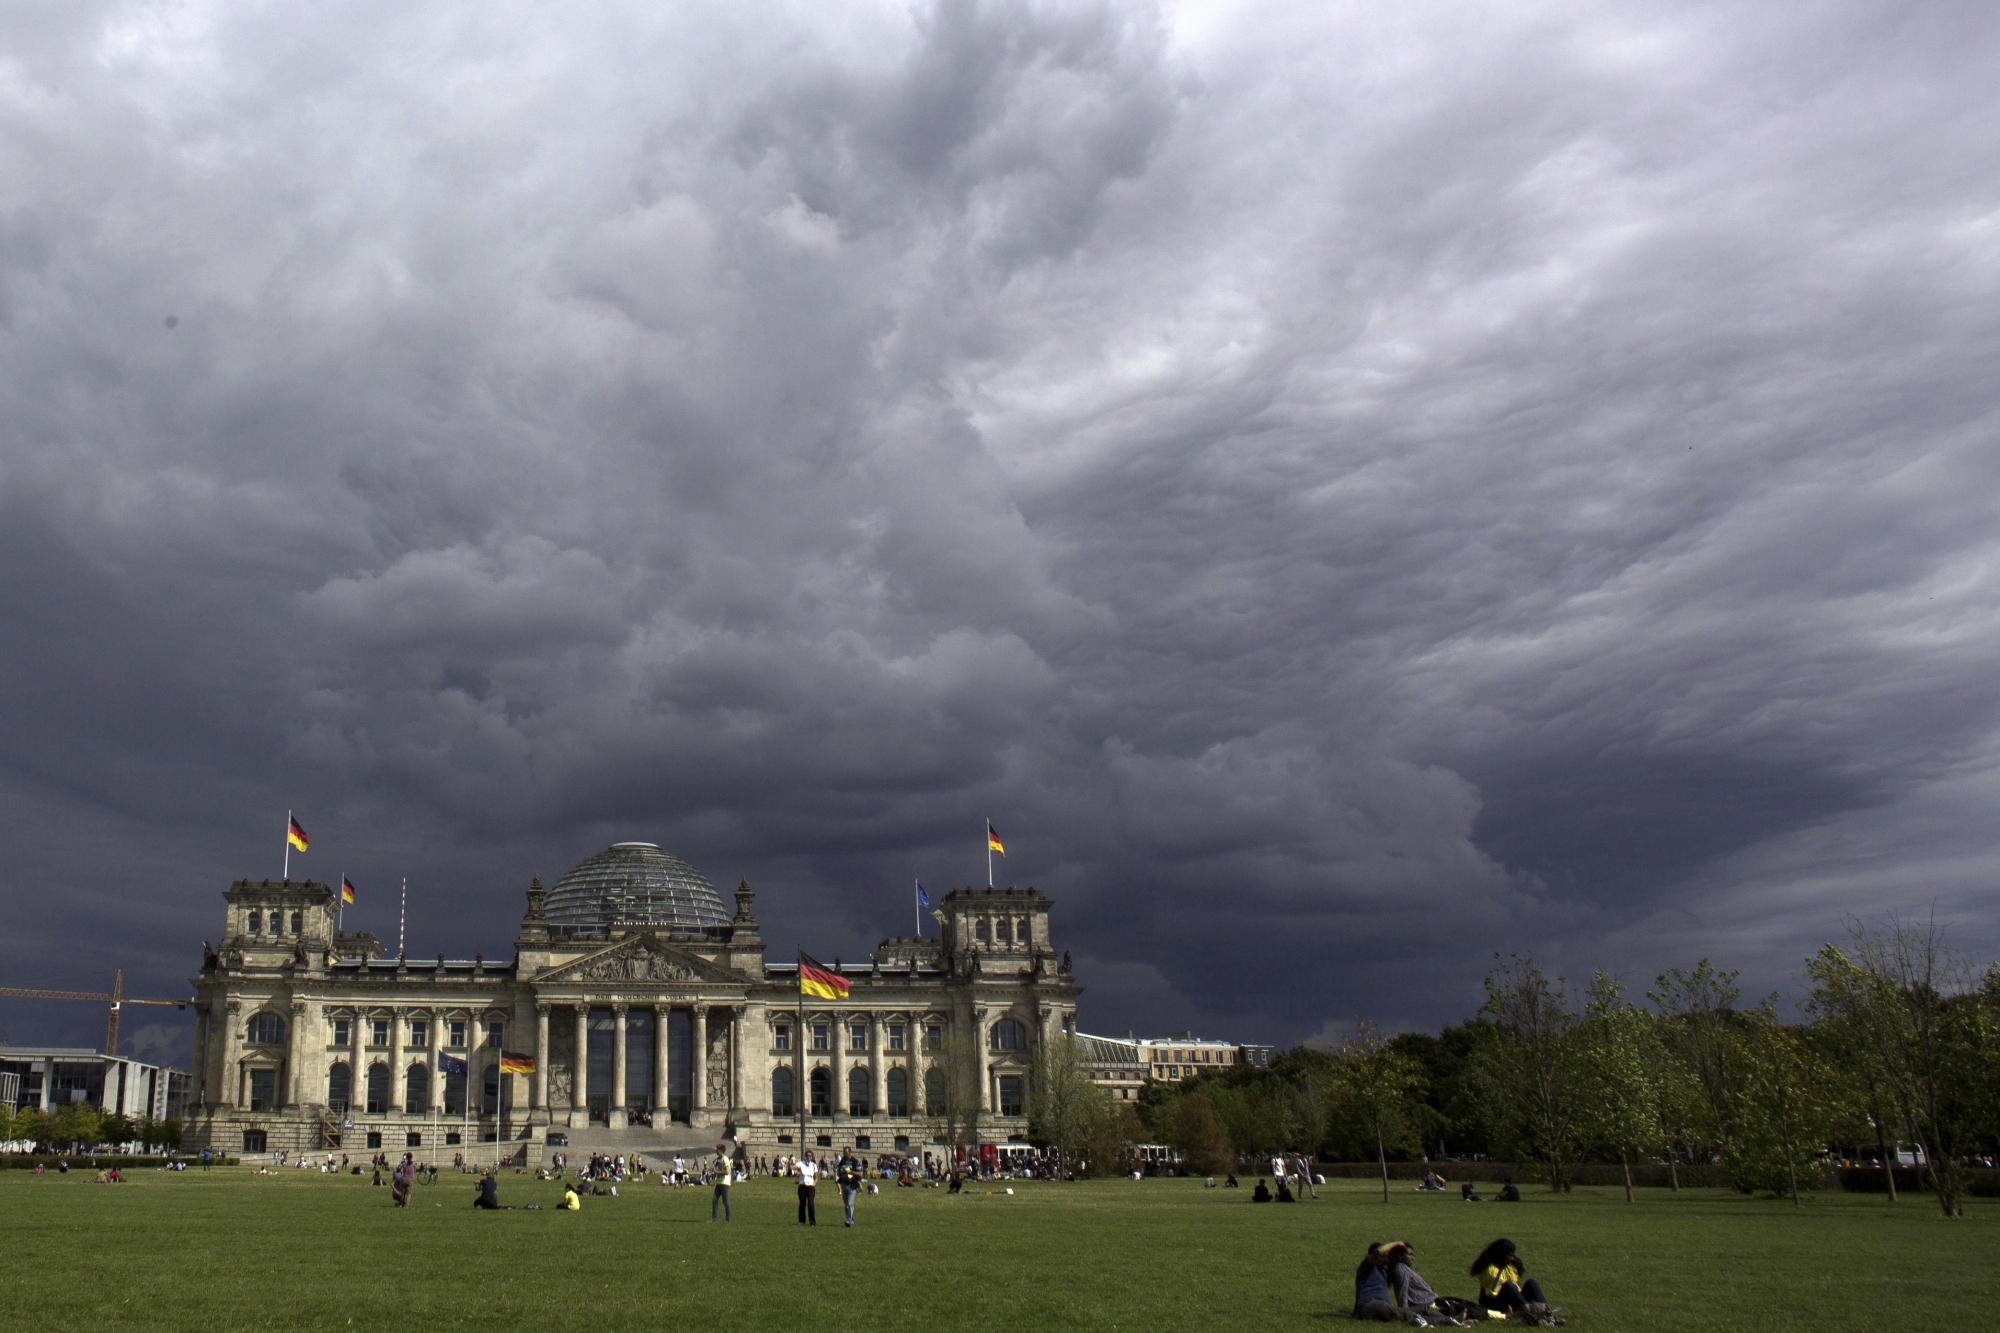 File - In this Tuesday, Aug. 20, 2013 file photo, dark clouds hang over the Reichstag, the German parliament Bundestag building, in Berlin. Hundreds of immigrants are running in Germany's national election on Sunday, raising the possibility of making its next parliament more diverse than ever. While it still might not fully represent the country's overall diversity, where more than a quarter of the population has immigrant roots, it's a step toward a more accurate reflection of society. (AP Photo/Markus Schreiber, File)